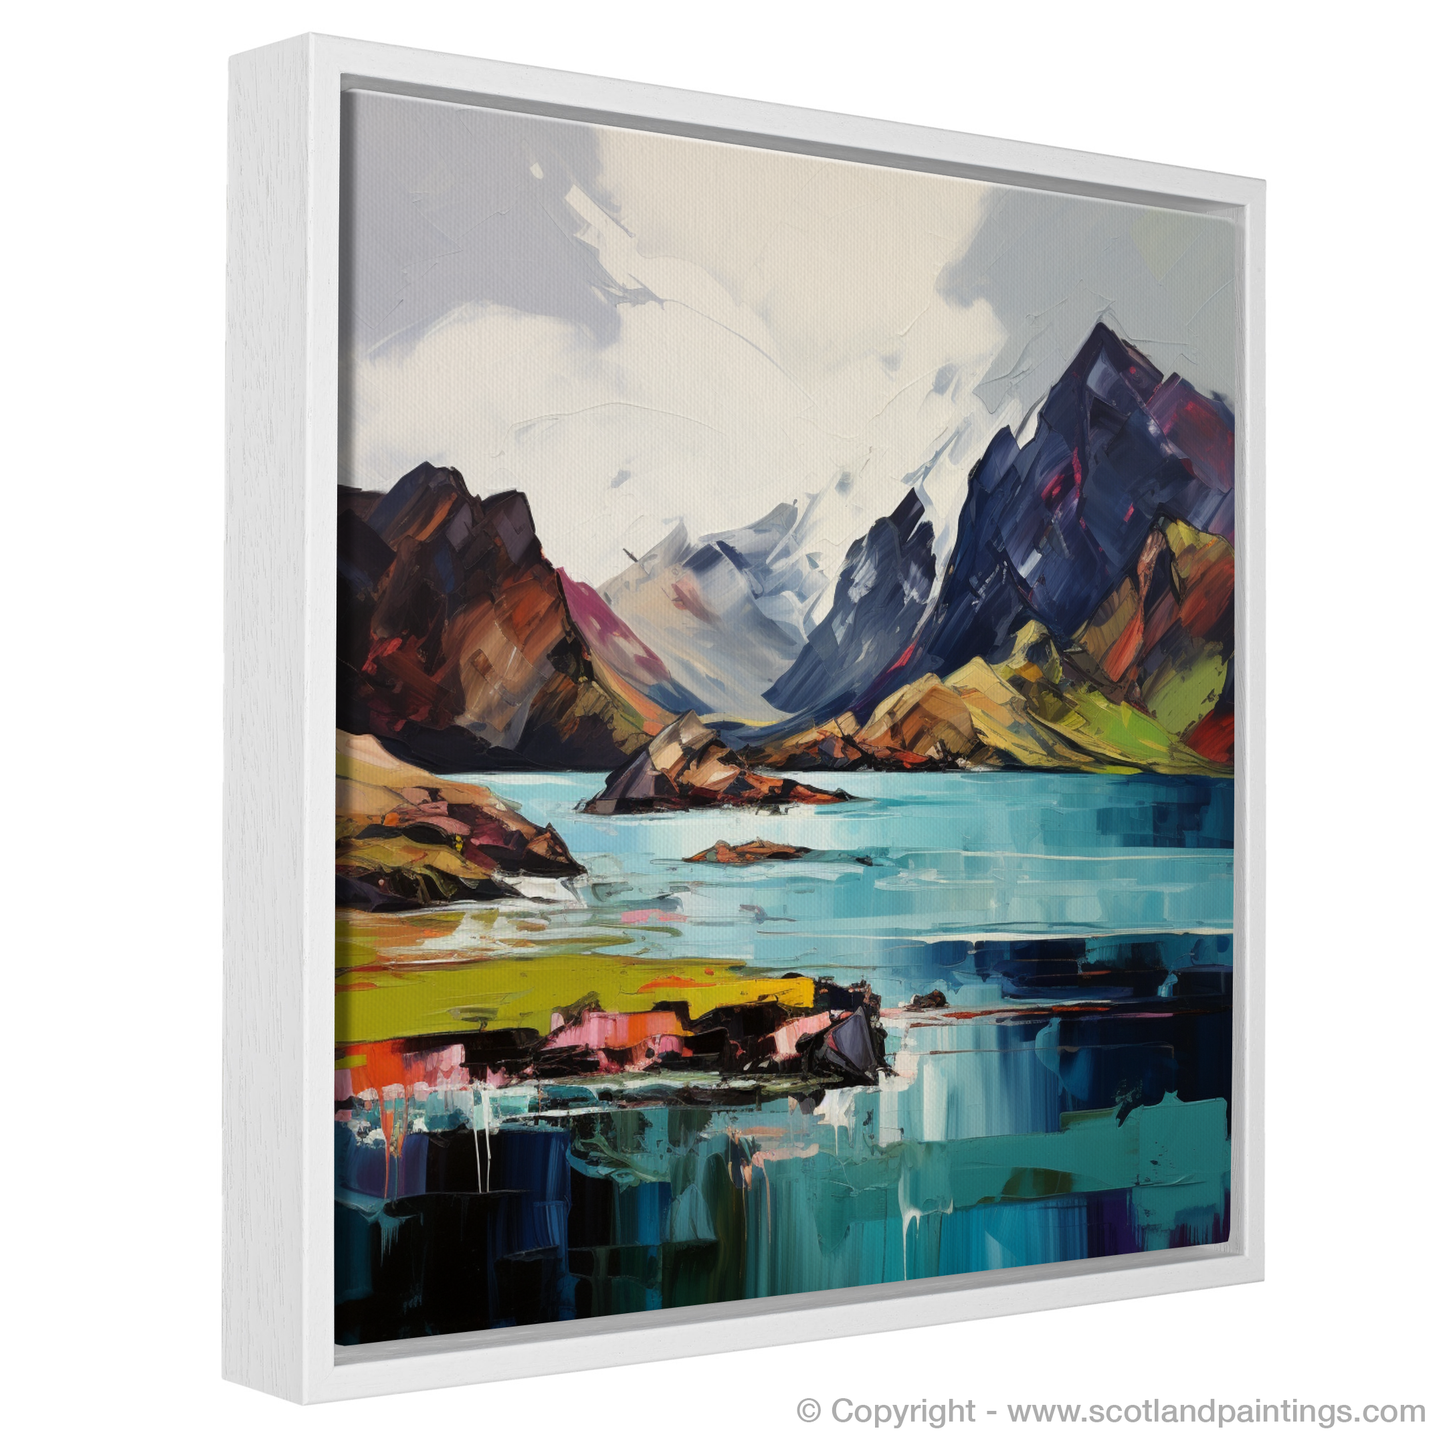 Painting and Art Print of Loch Coruisk, Isle of Skye entitled "Expressionist Echoes of Loch Coruisk".